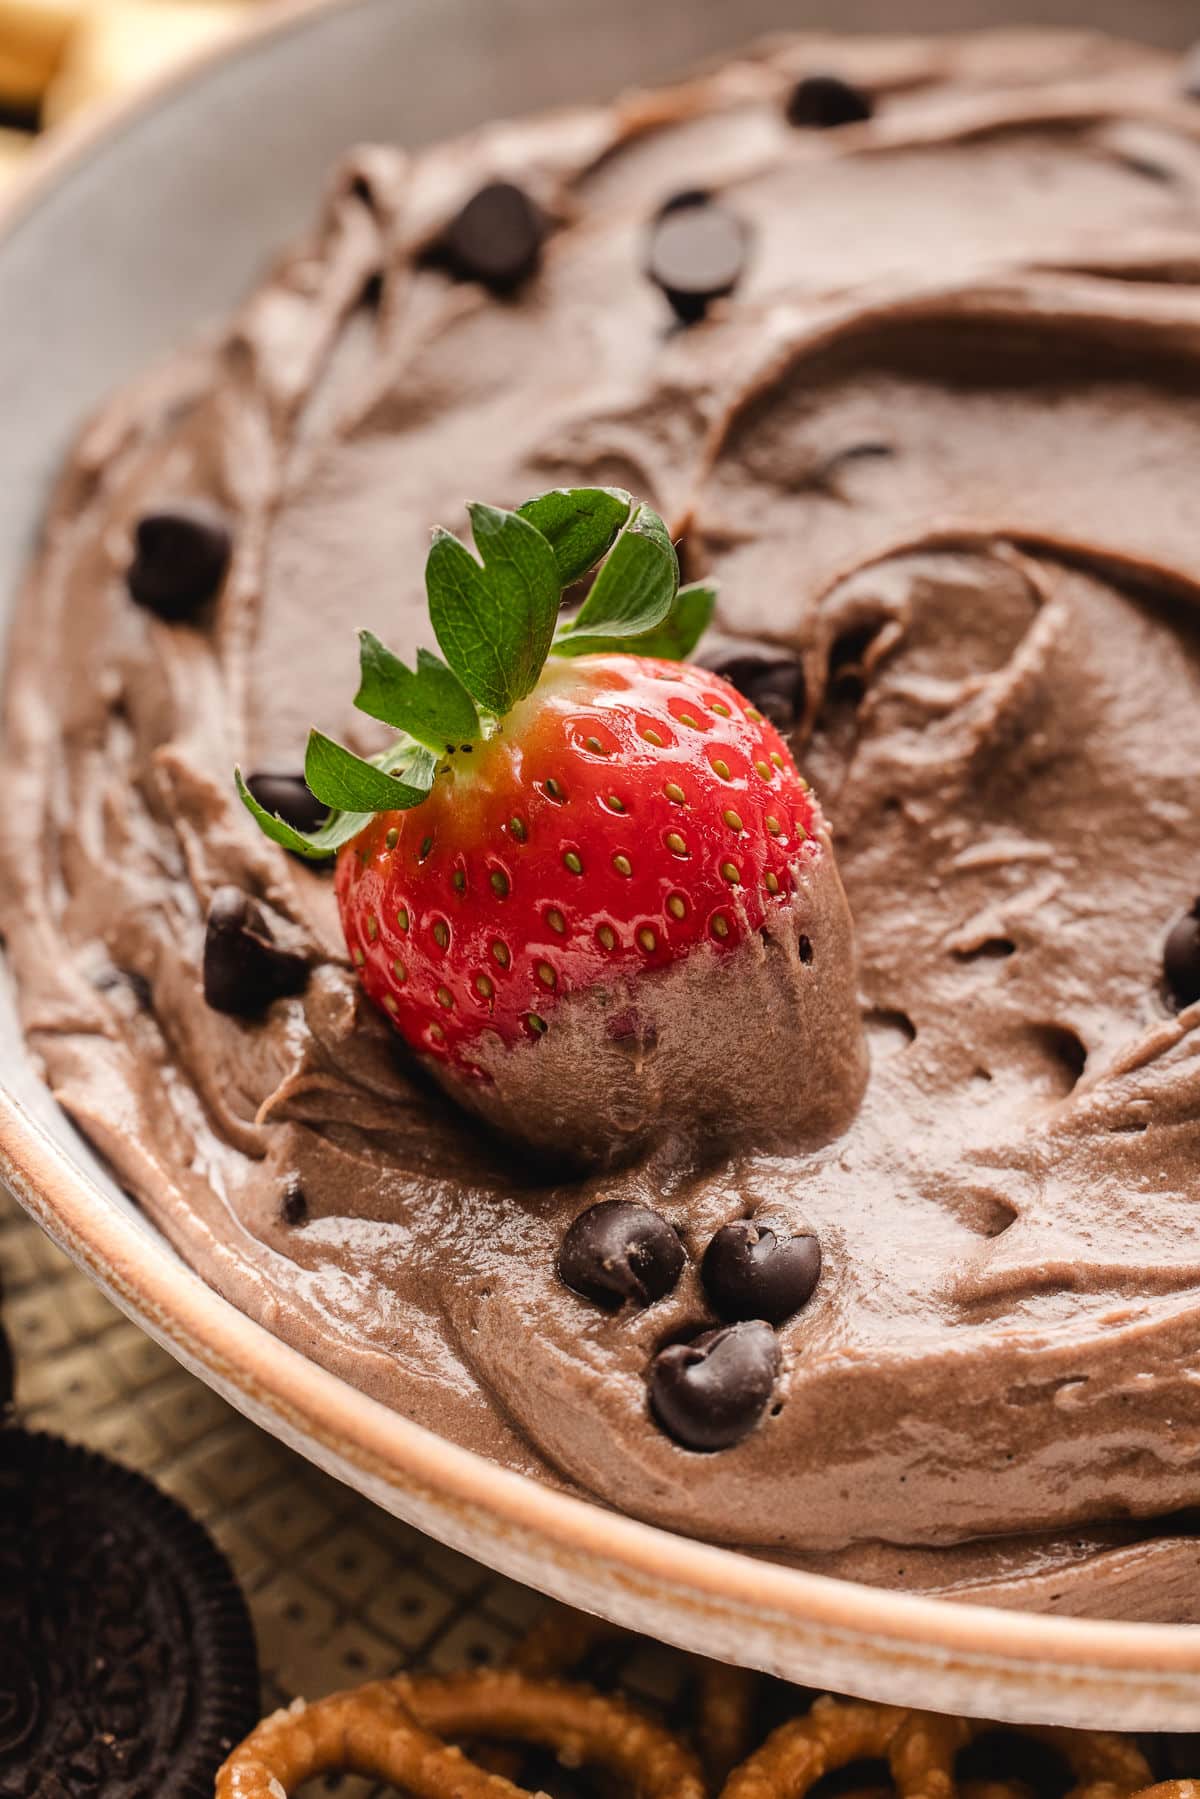 A strawberry sitting in a dish of brownie batter dip.